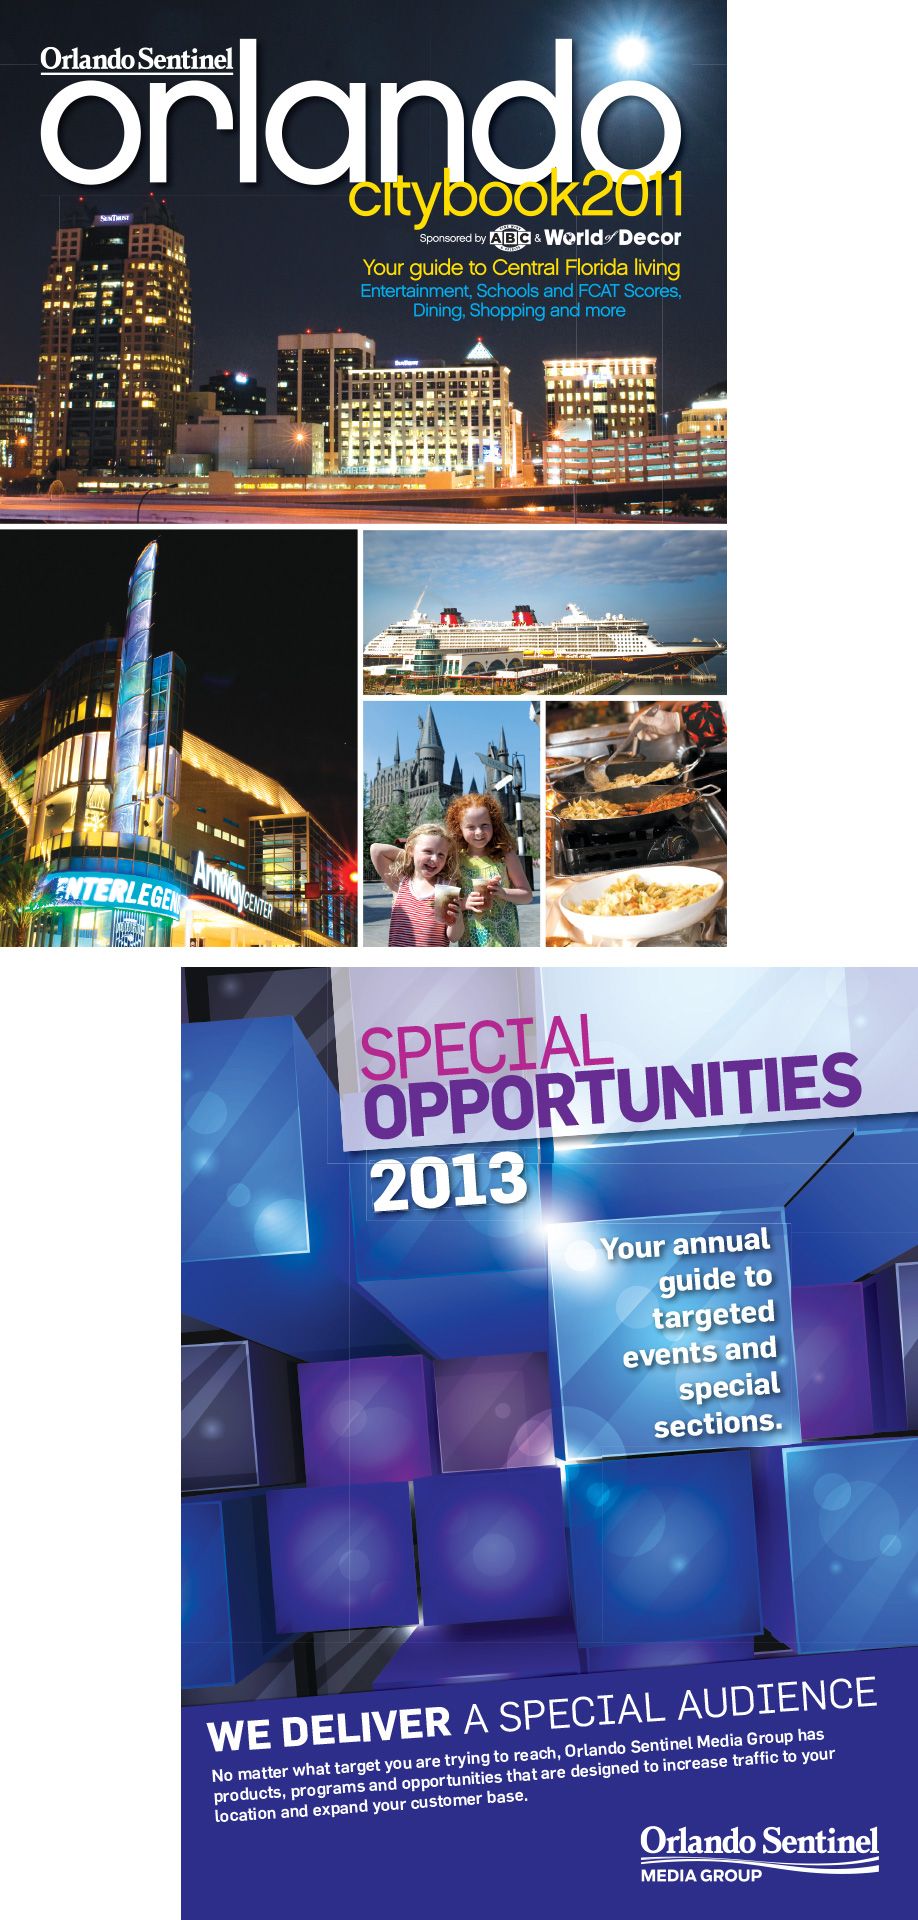 Orlando Citybook Entertainment Guide and Special Advertising Section Calender covers